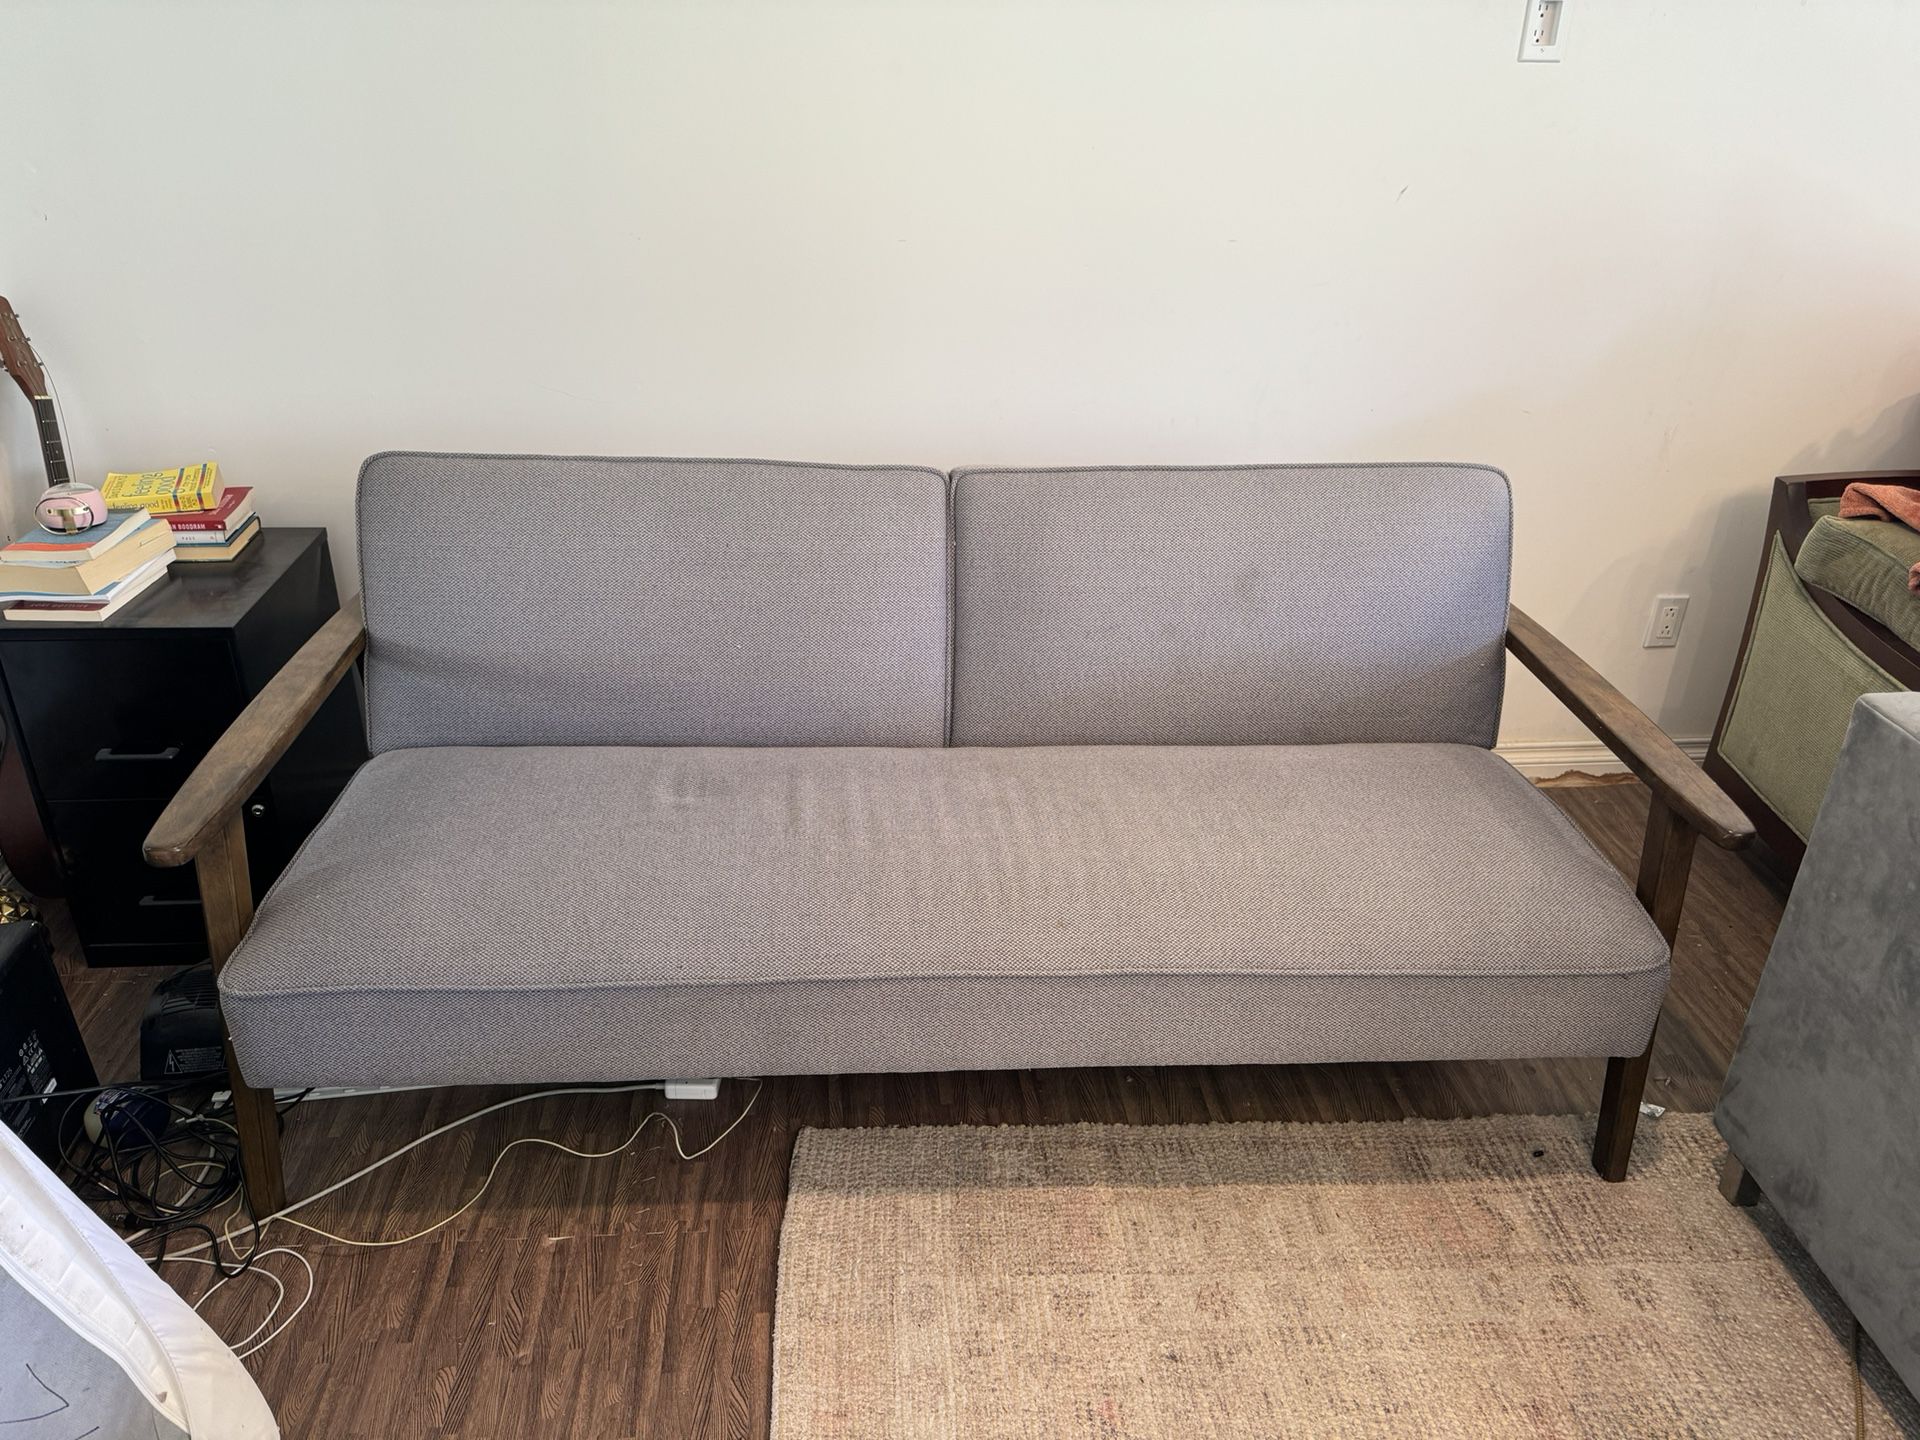 Fold Out Futon Couch